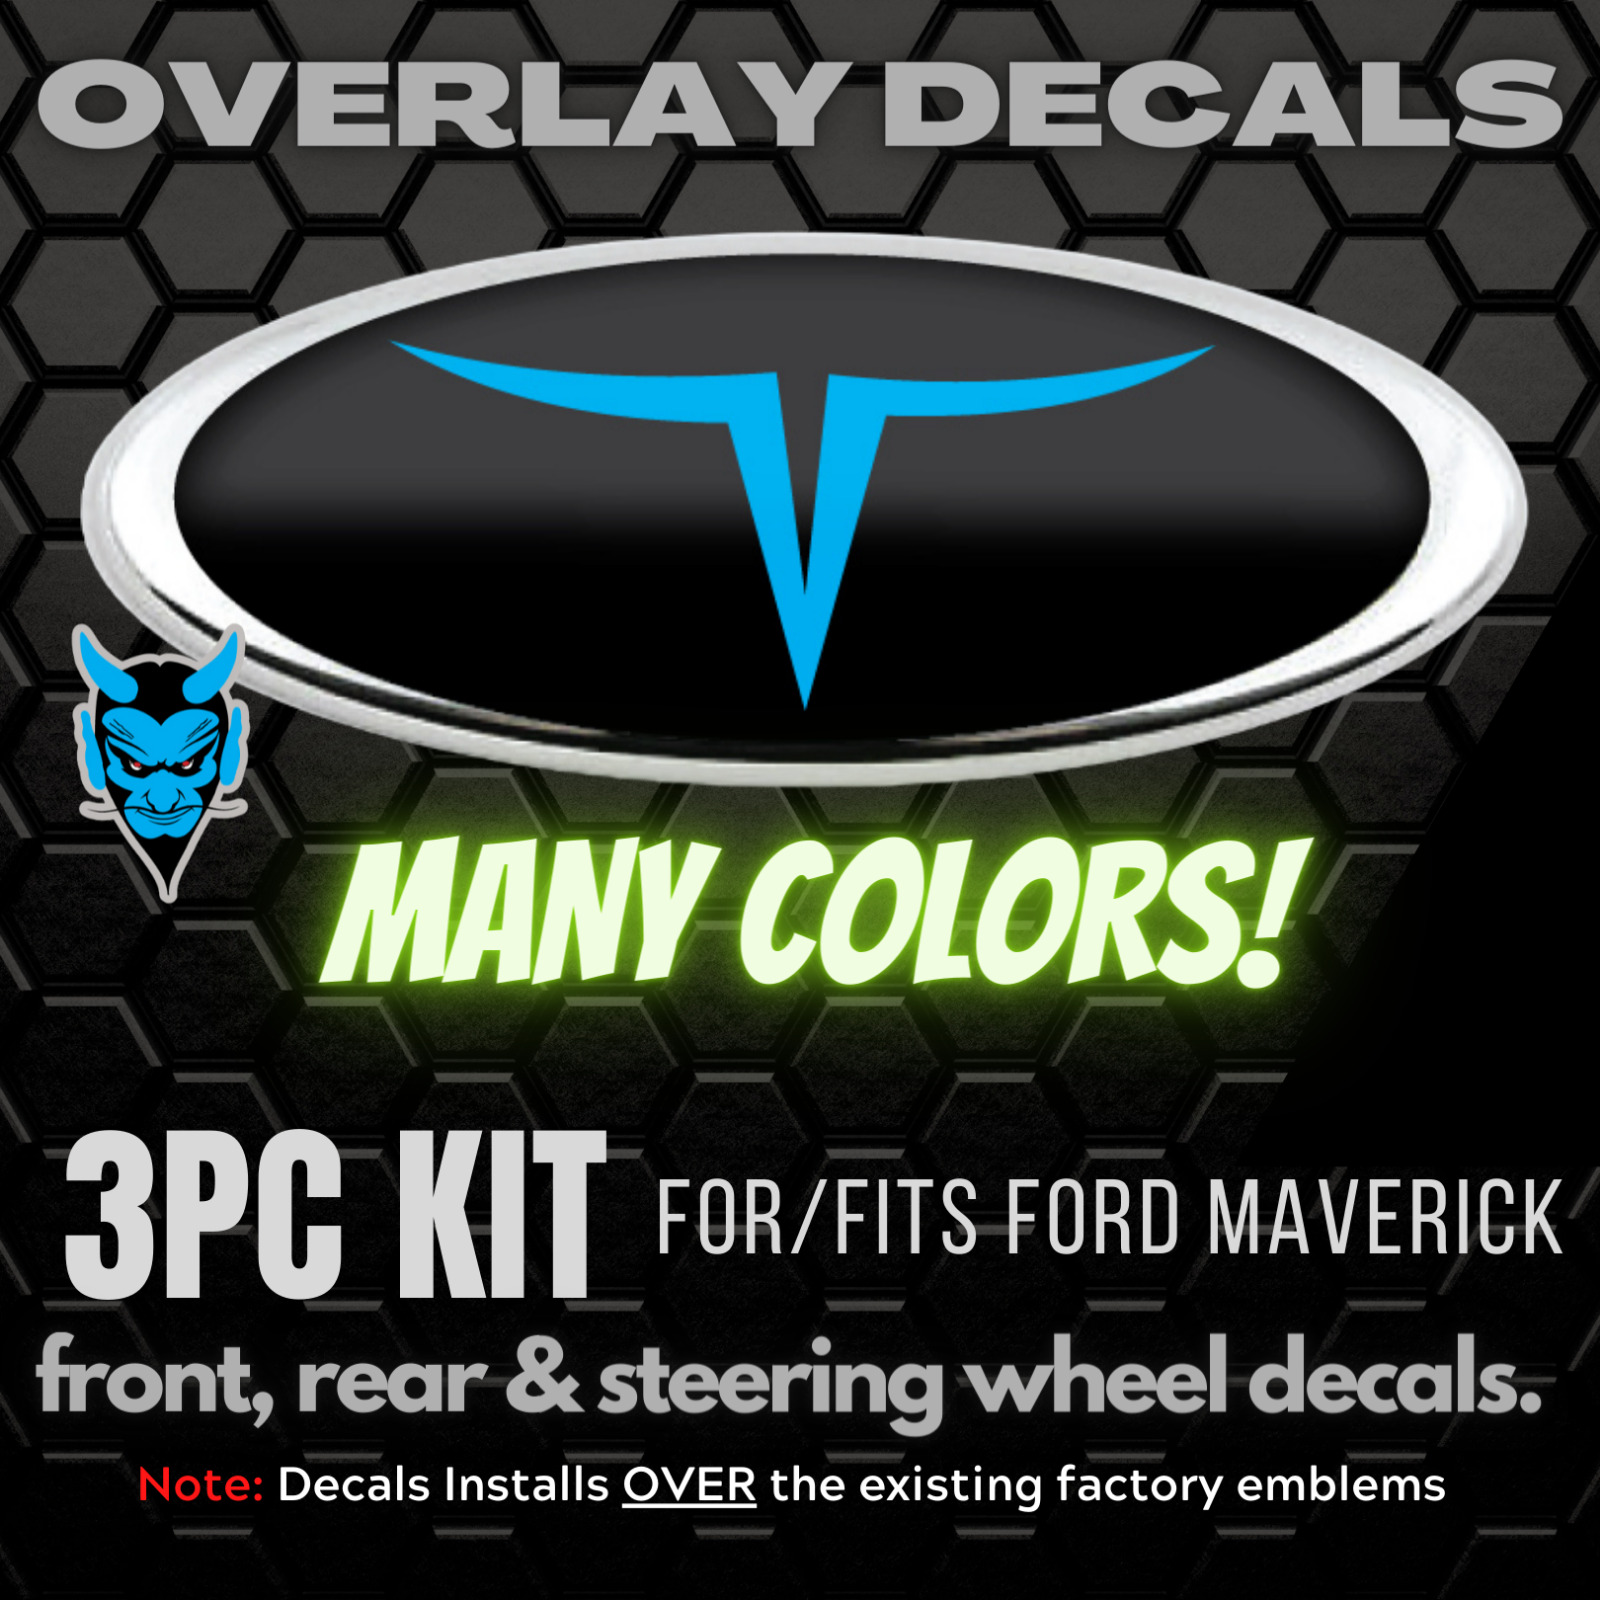 NEW FITS 2022 Ford Maverick Truck OVERLAY Decals Front, Rear and Steering Wheel